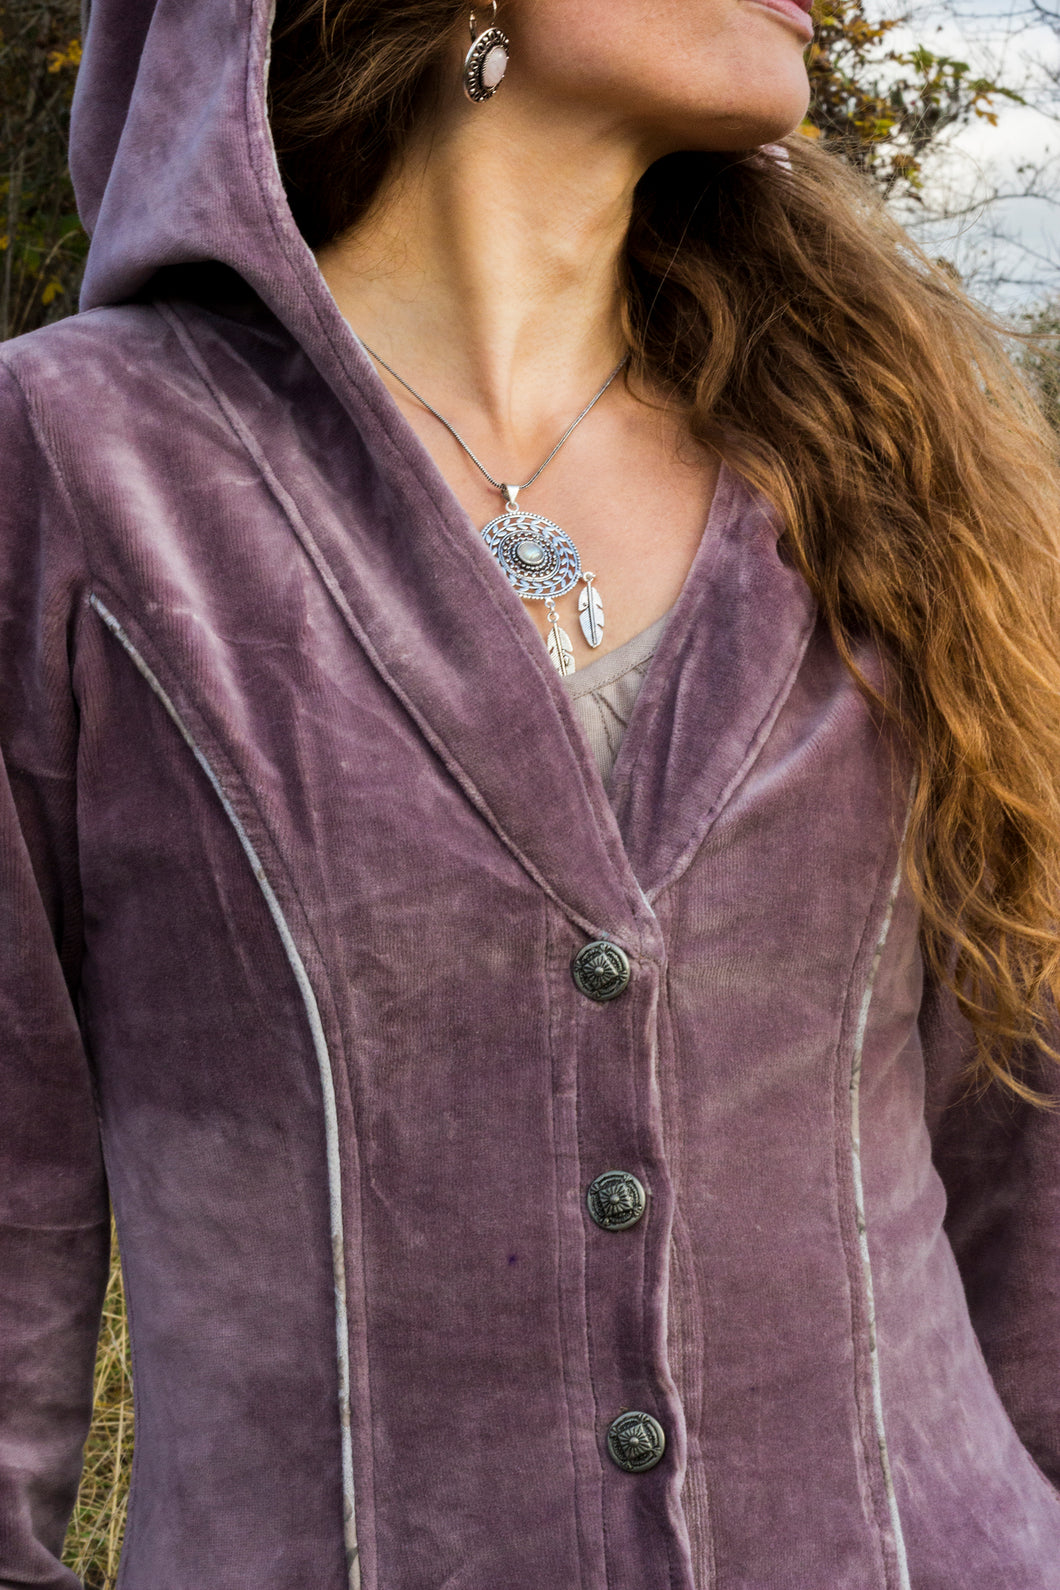 DREAMCATCHER SILVER NECKLACE with moonstone gemstone